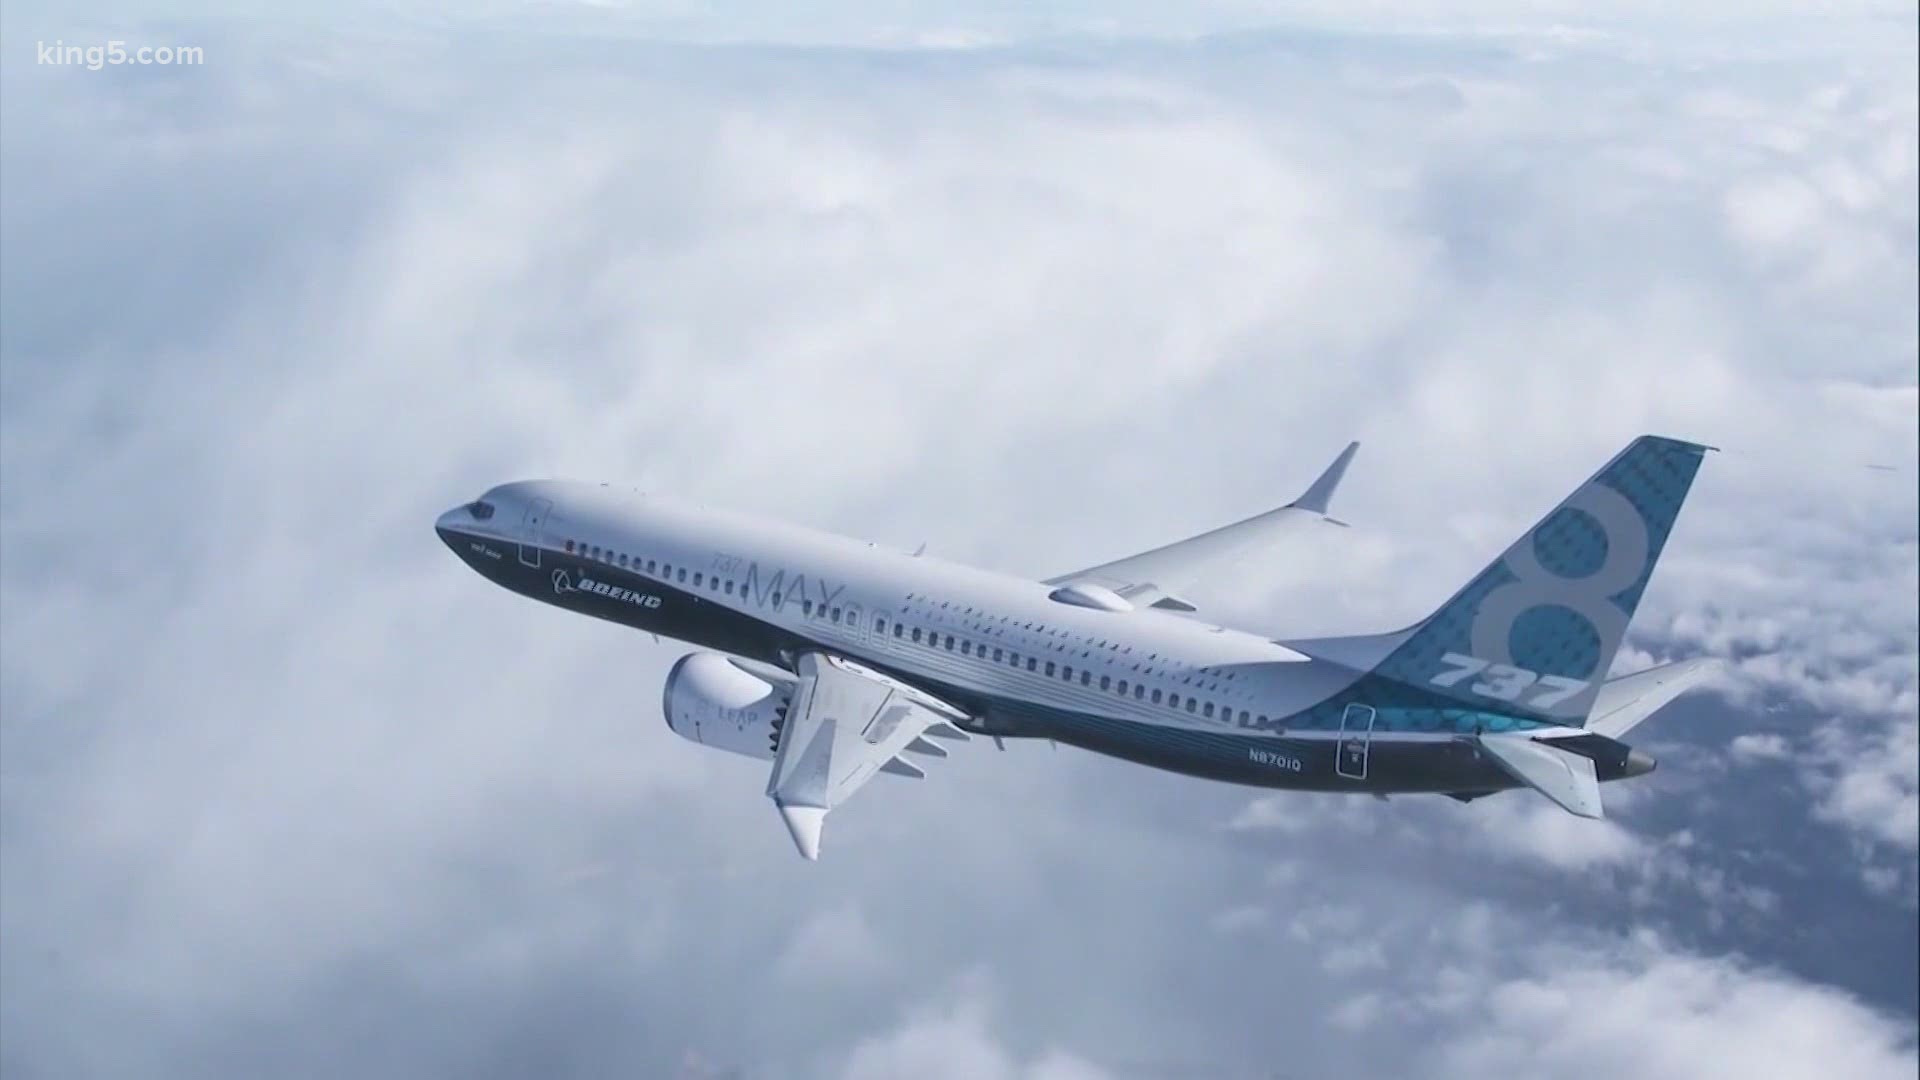 Sources tell KING 5 that the Federal Aviation Administration will lift the 20-month grounding of the Boeing 737 MAX in the United States on Wednesday.